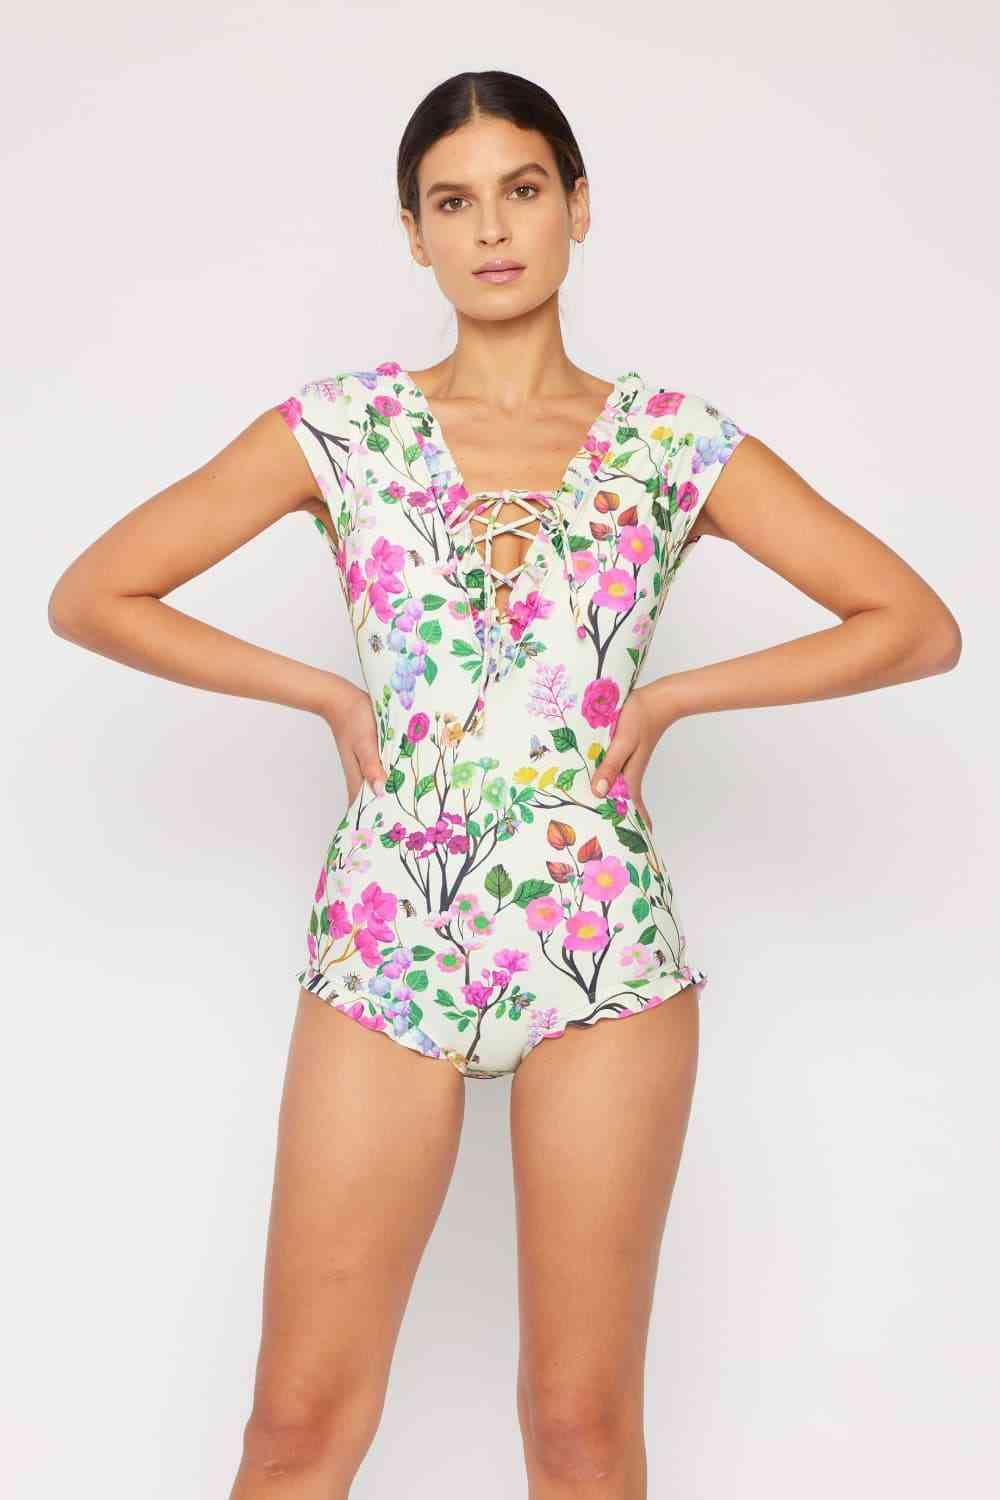 Marina West Swim Bring Me Flowers V-Neck One Piece Swimsuit Cherry Blossom Cream - God's Girl Gifts And Apparel